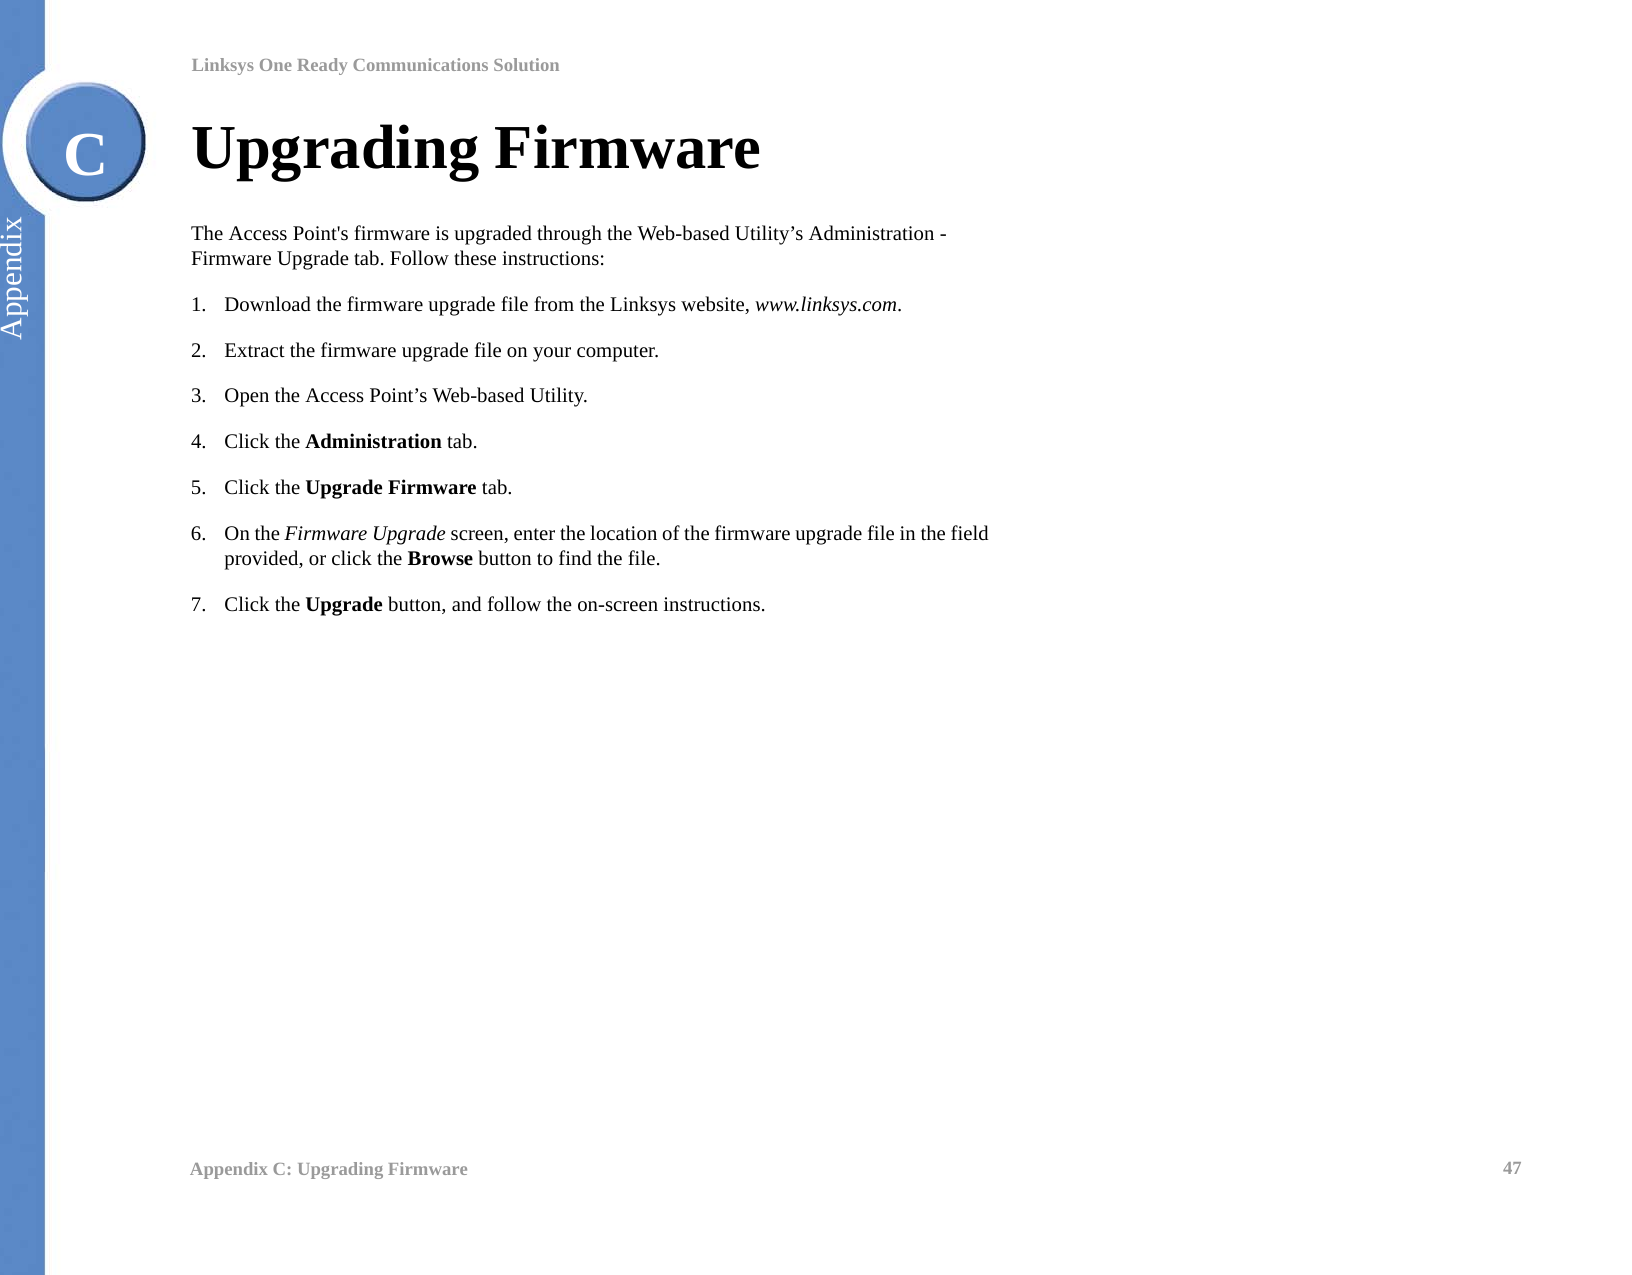 47Appendix C: Upgrading FirmwareLinksys One Ready Communications SolutionAppendixCUpgrading FirmwareThe Access Point&apos;s firmware is upgraded through the Web-based Utility’s Administration - Firmware Upgrade tab. Follow these instructions:1. Download the firmware upgrade file from the Linksys website, www.linksys.com.2. Extract the firmware upgrade file on your computer.3. Open the Access Point’s Web-based Utility.4. Click the Administration tab.5. Click the Upgrade Firmware tab.6. On the Firmware Upgrade screen, enter the location of the firmware upgrade file in the field provided, or click the Browse button to find the file.7. Click the Upgrade button, and follow the on-screen instructions.